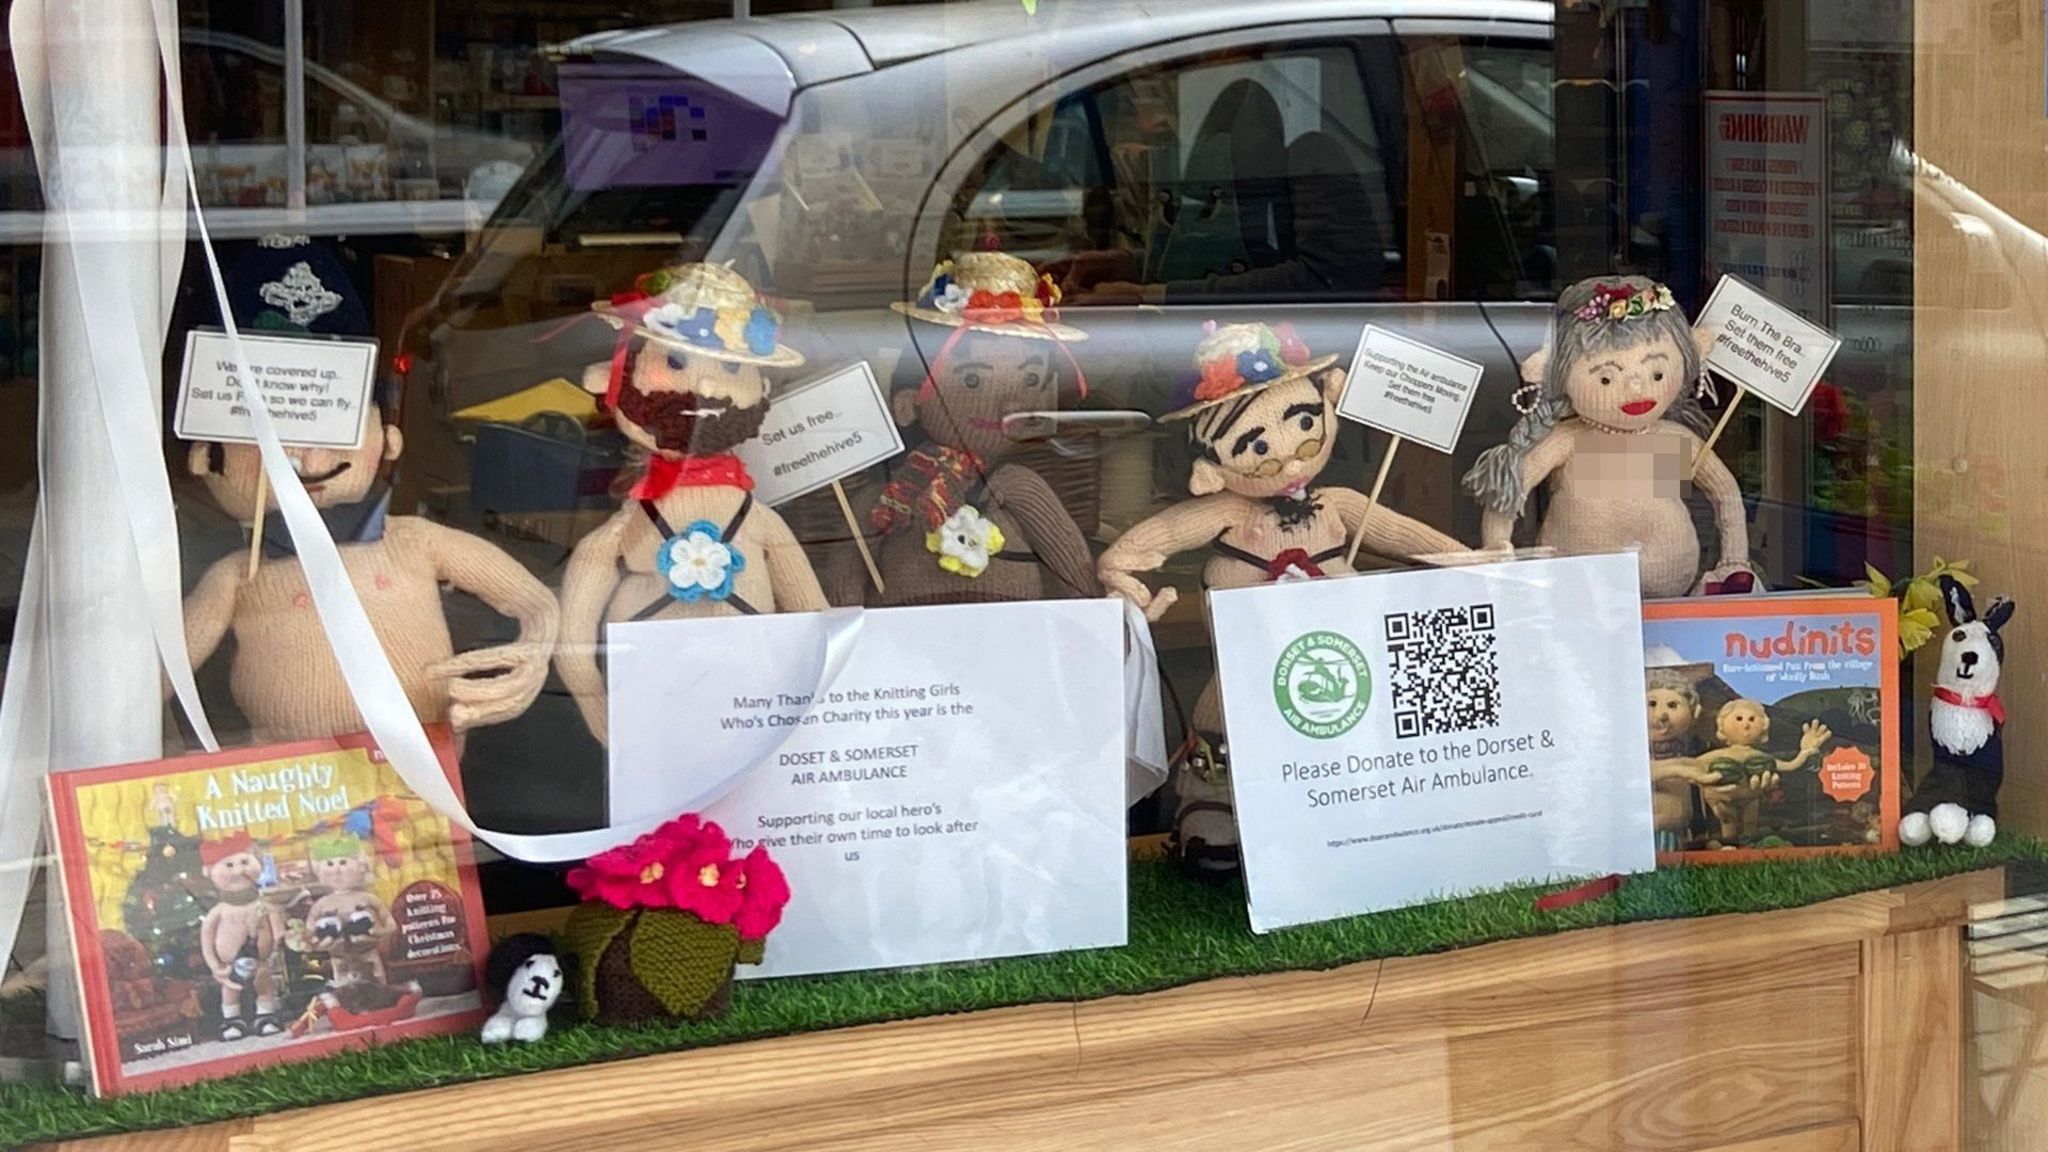 The five knitted figures have been covered up with books and paper